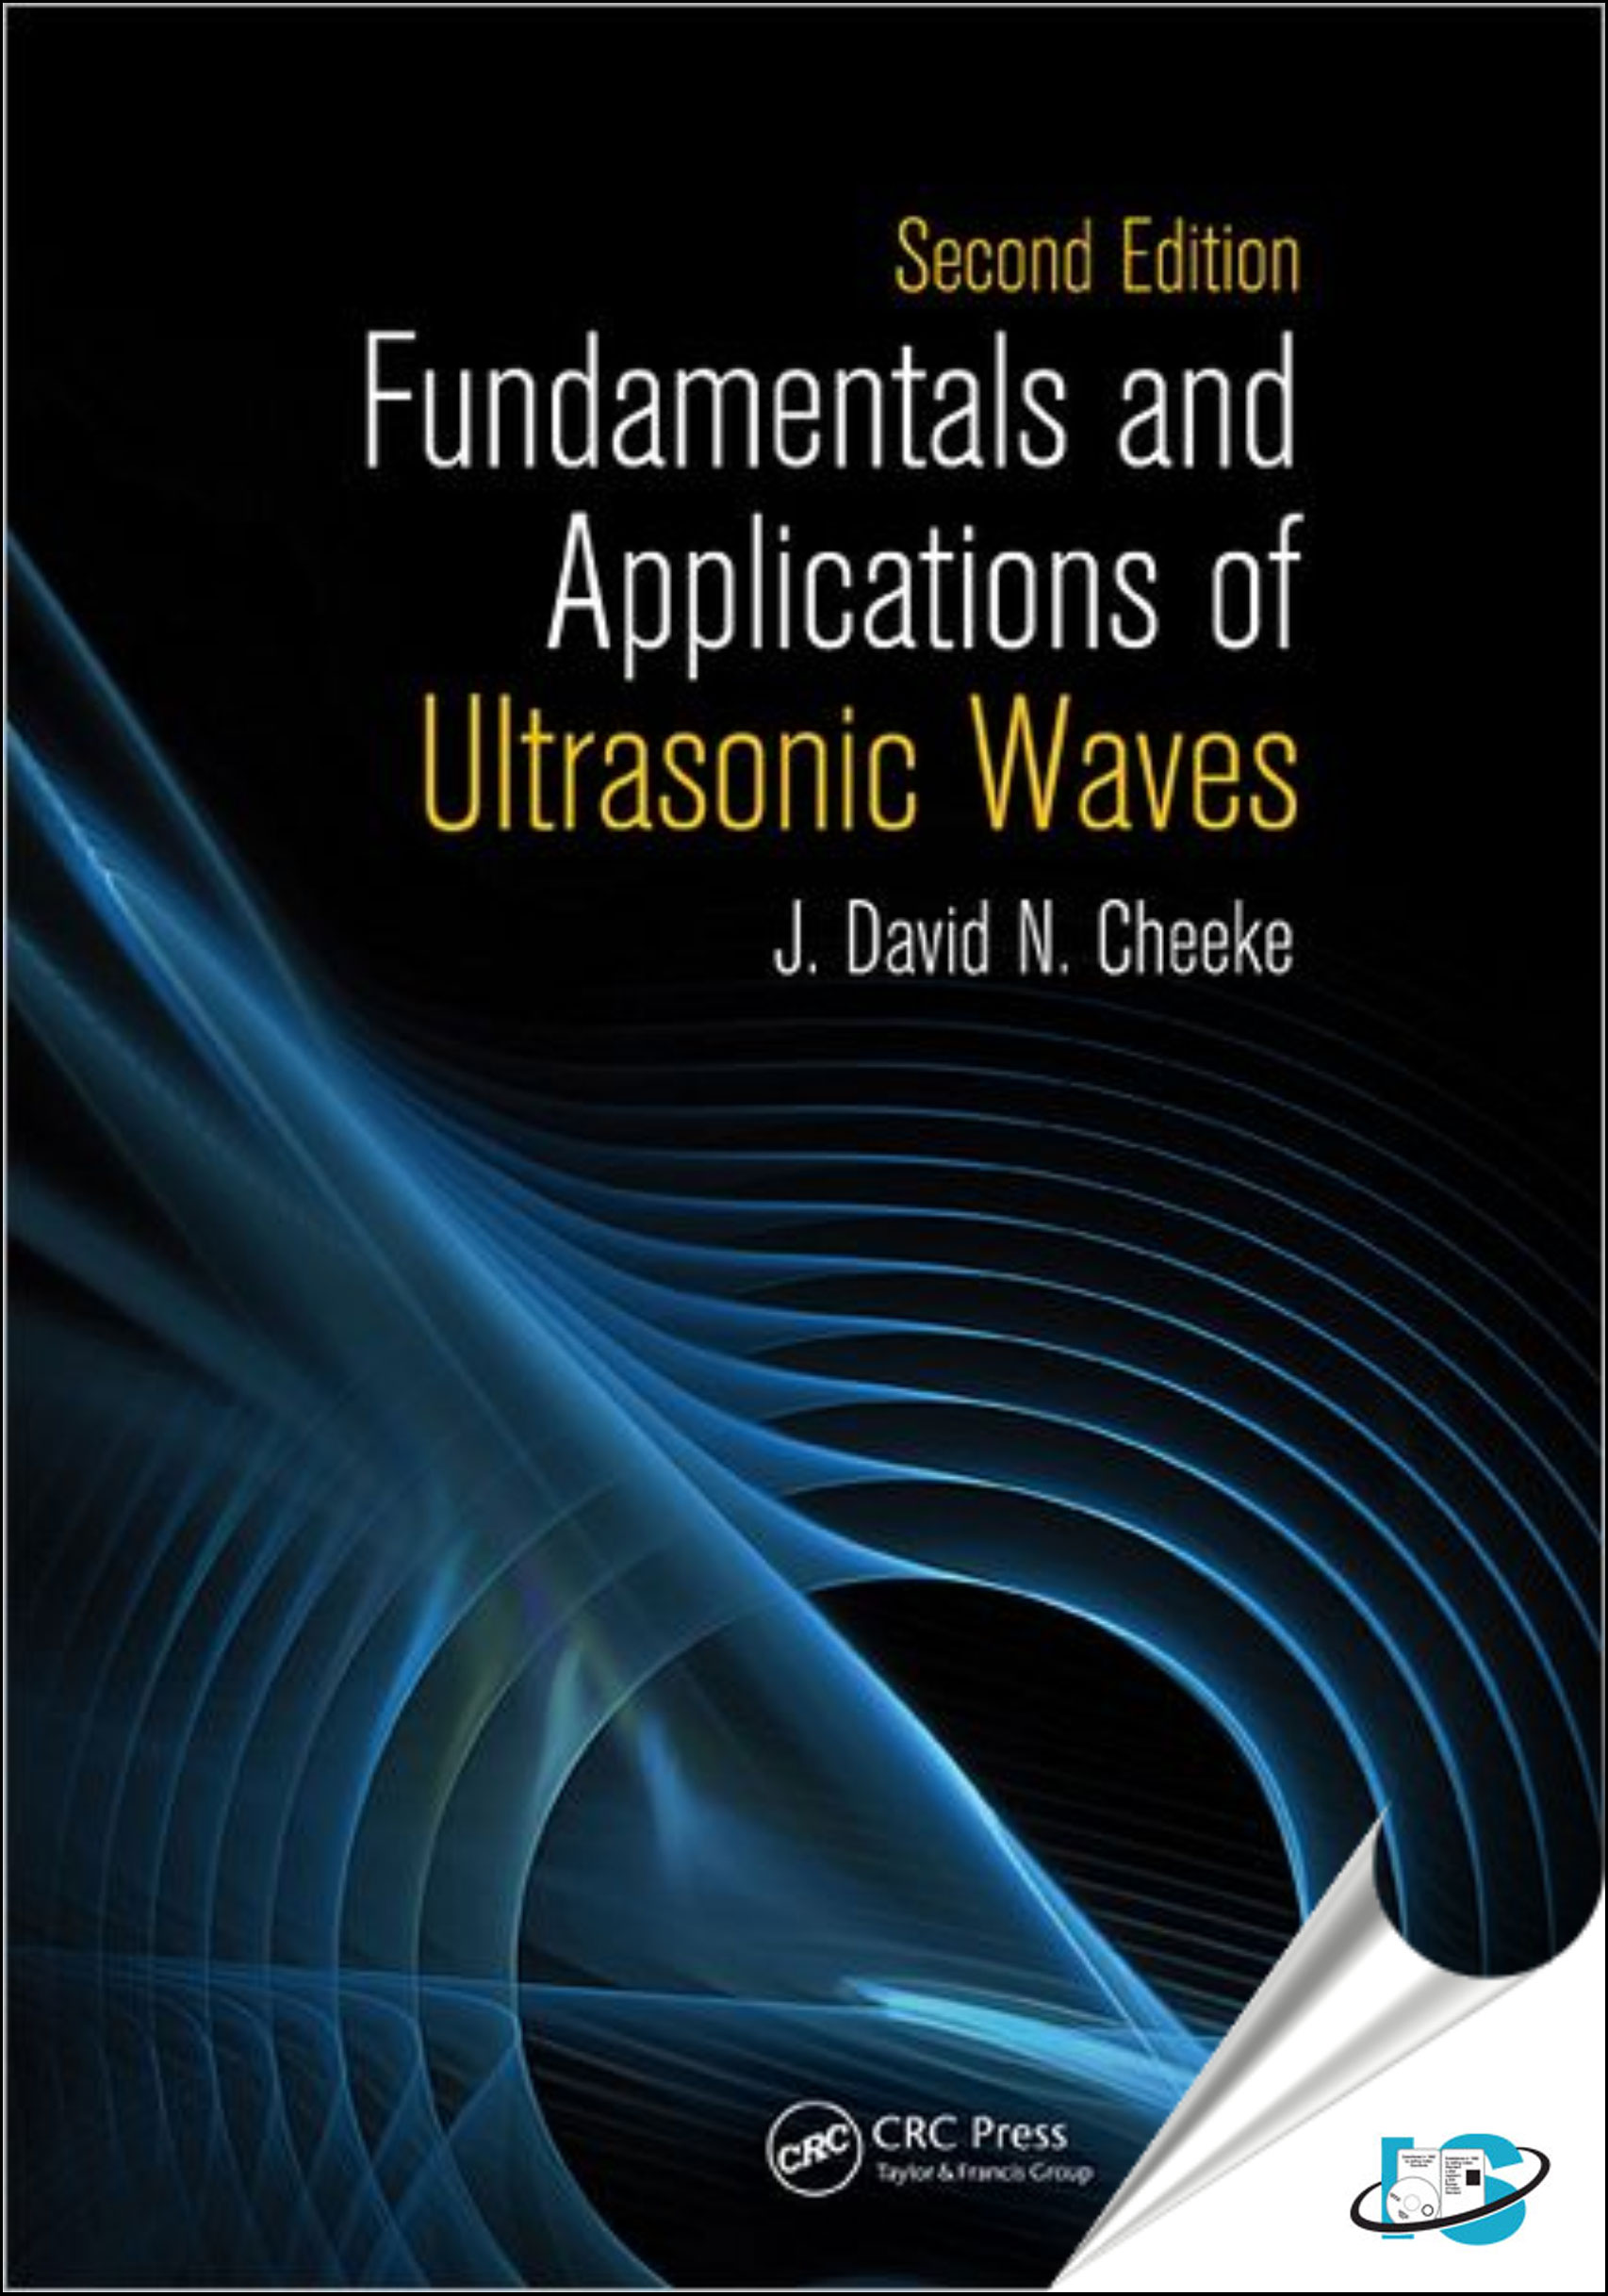 Fundamentals and Applications of Ultrasonic Waves, 2nd Edition